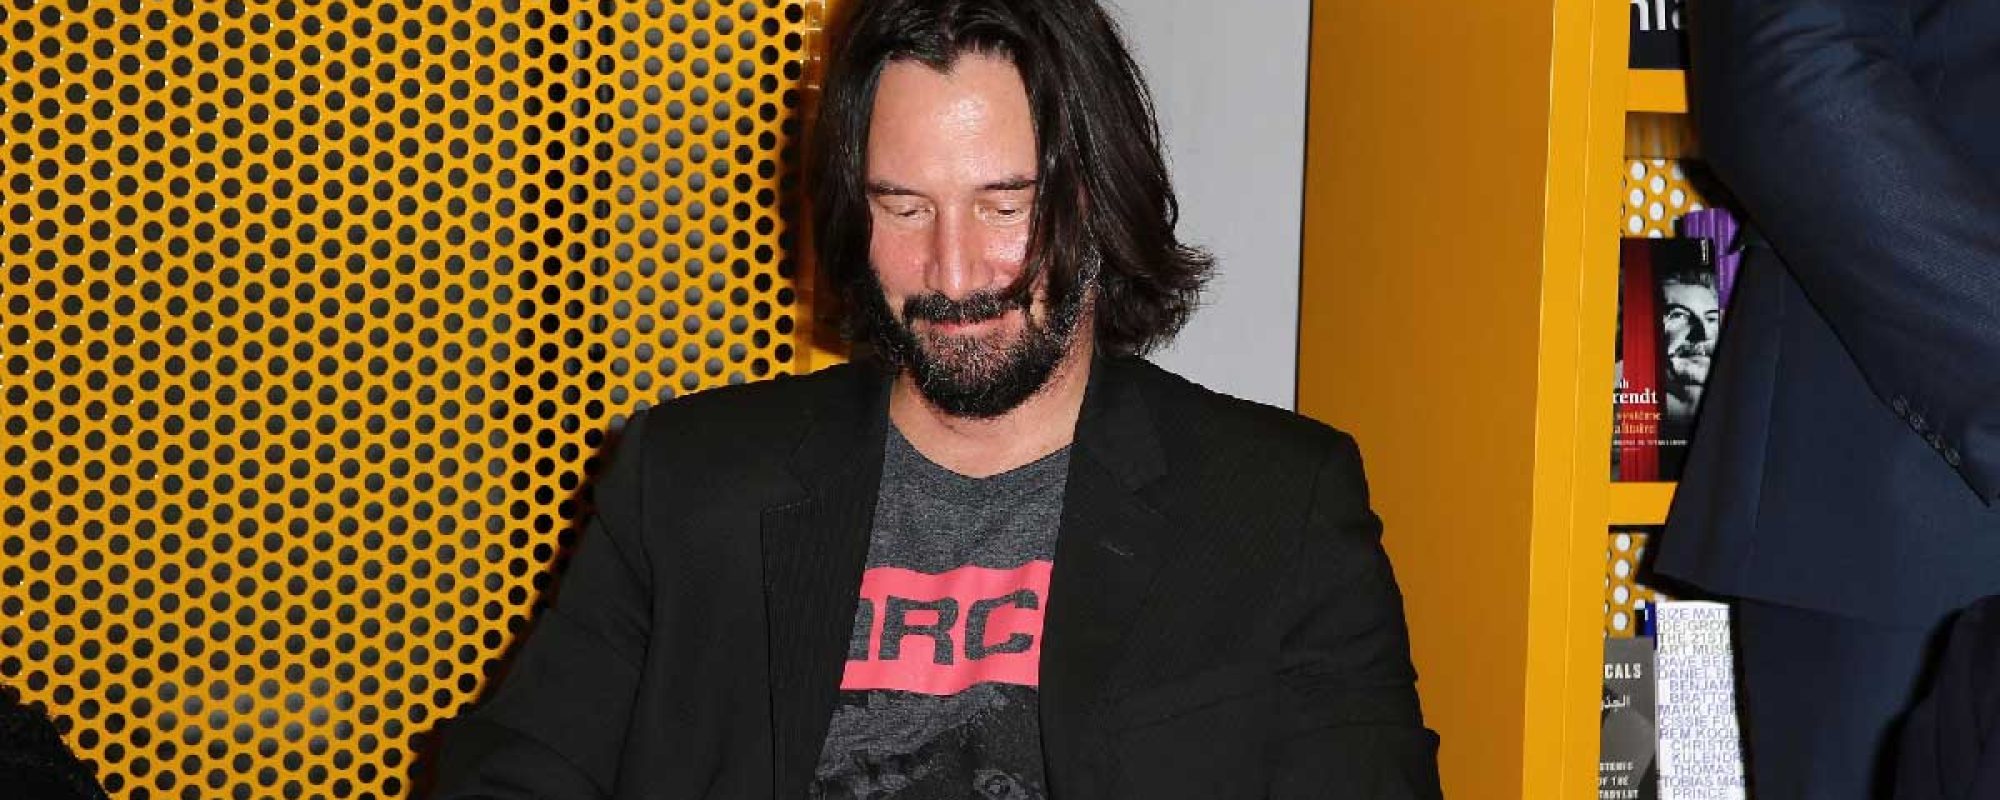 Keanu Reeves and Alexandra Grant on Publishing Books by Artists